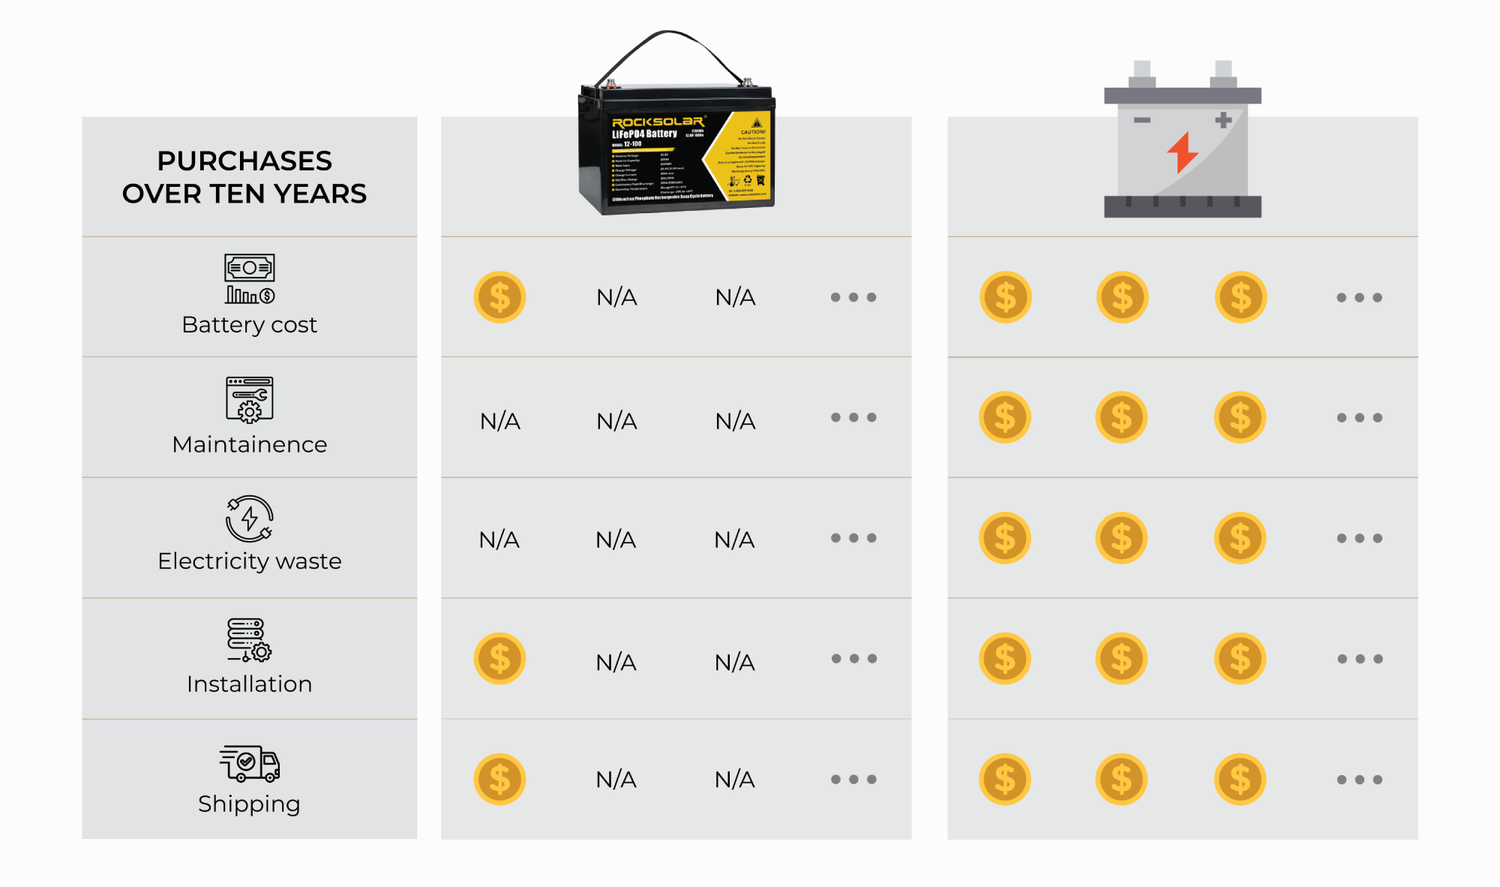 Rocksolar LifePO4 vs Lead Acid Batteries: A Cost Comparison for Golf Cart Batteries Over 10 Years